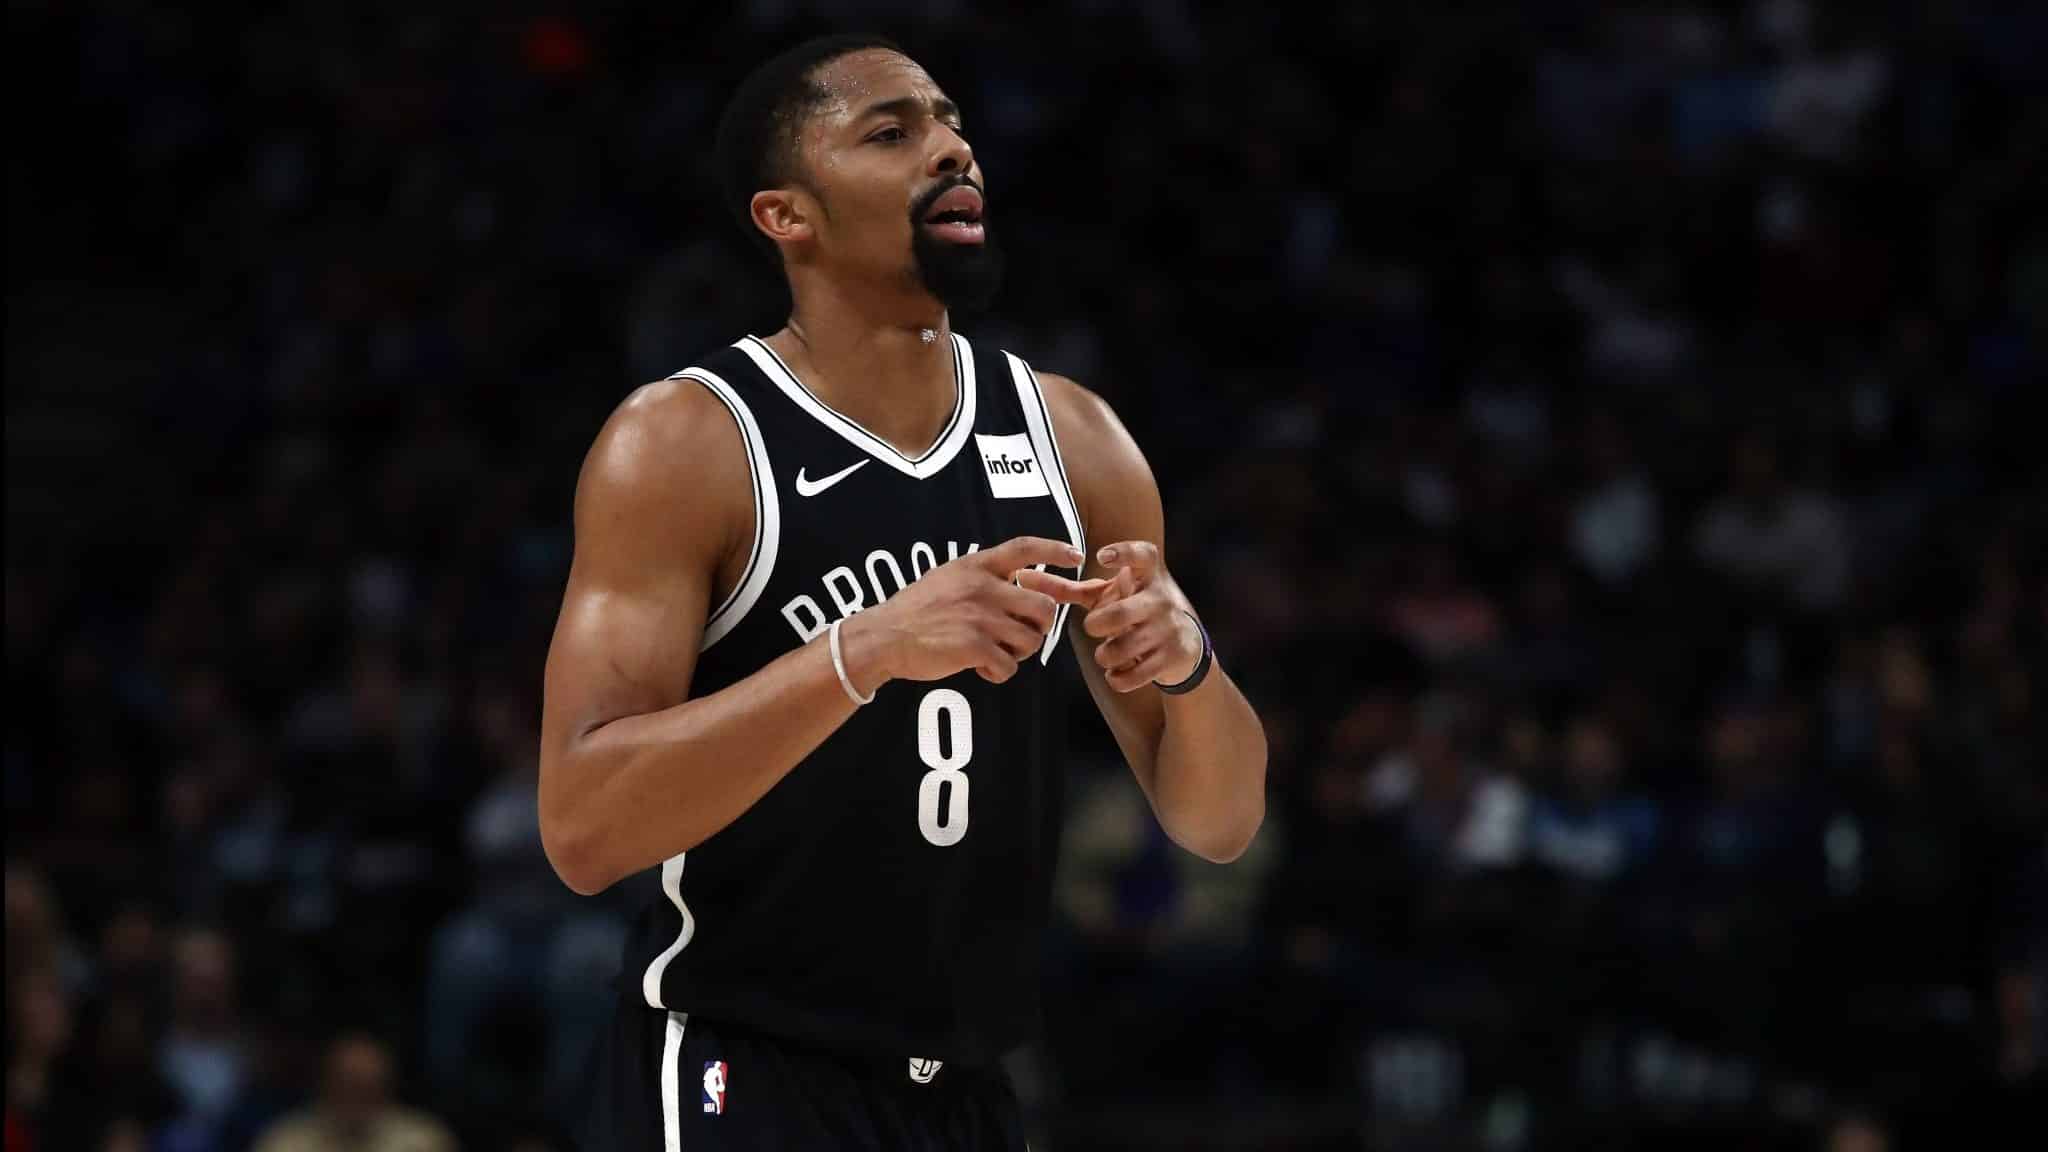 DALLAS, TEXAS - JANUARY 02: Spencer Dinwiddie #8 of the Brooklyn Nets at American Airlines Center on January 02, 2020 in Dallas, Texas. NOTE TO USER: User expressly acknowledges and agrees that, by downloading and or using this photograph, User is consenting to the terms and conditions of the Getty Images License Agreement.